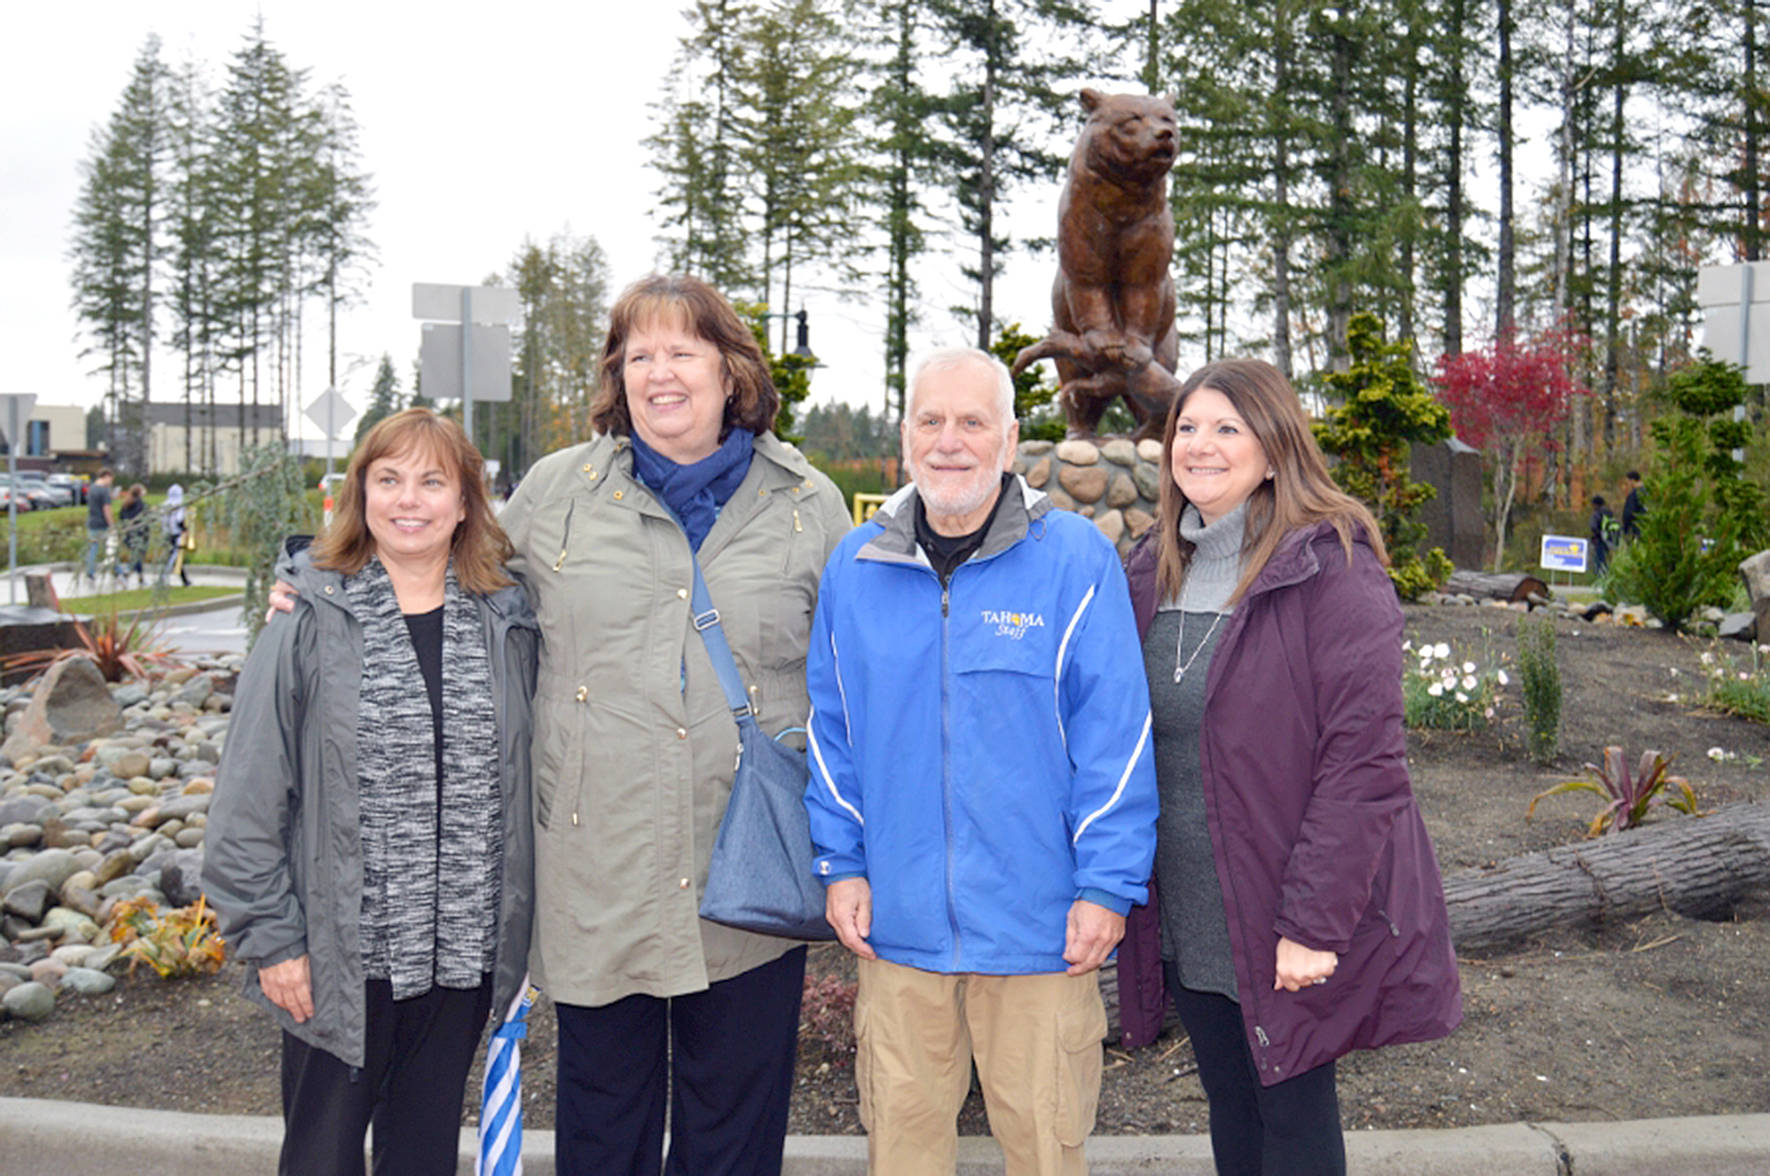 Former Tahoma School District Superintendent Mike “Papa Bear” Maryanski stands with district leaders after the bear statue at Tahoma High School was dubbed “Papa Bear” in gratitude for his service to the district. Photo courtesy of Tahoma School District.